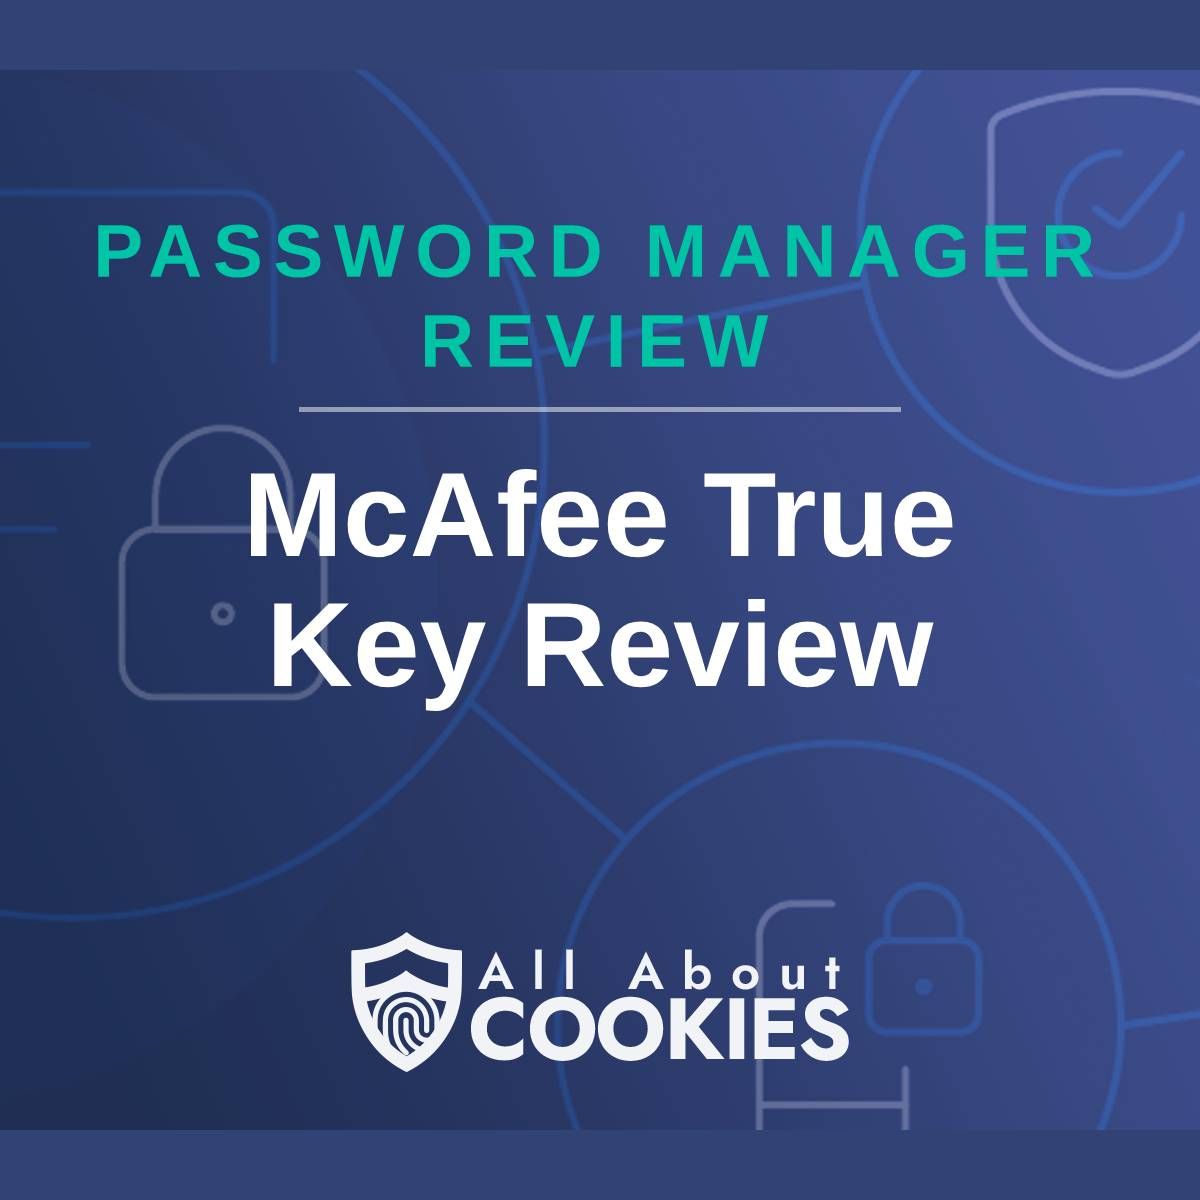 A blue background with images of locks and shields with the text &quot;Password Manager Review McAfee True Key Review&quot; and the All About Cookies logo. 